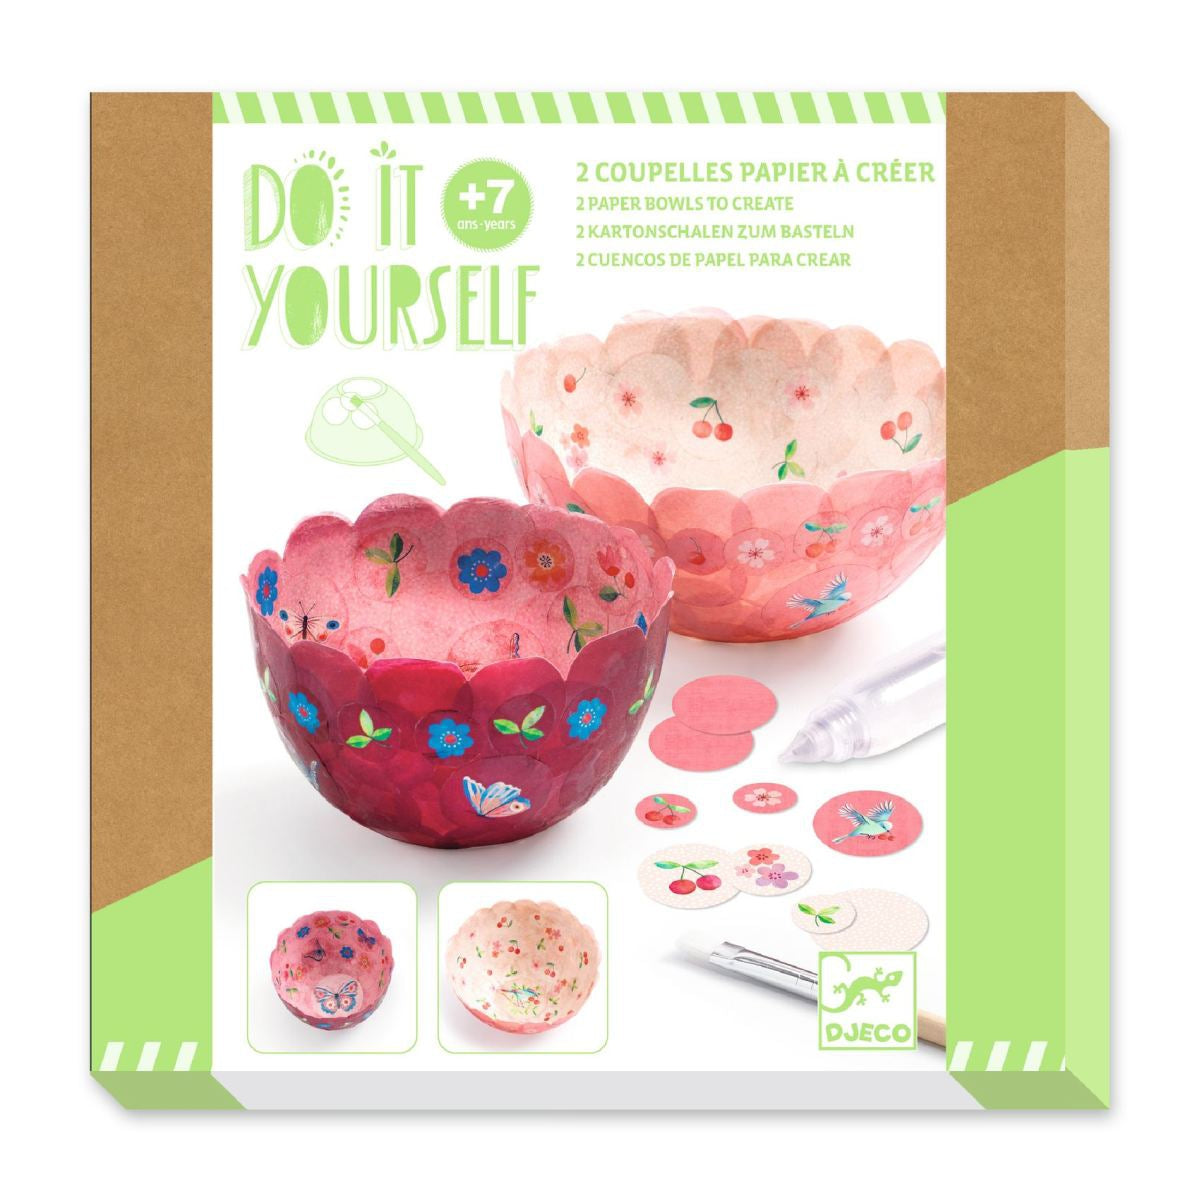 In the Air Paper Bowl Craft Kit